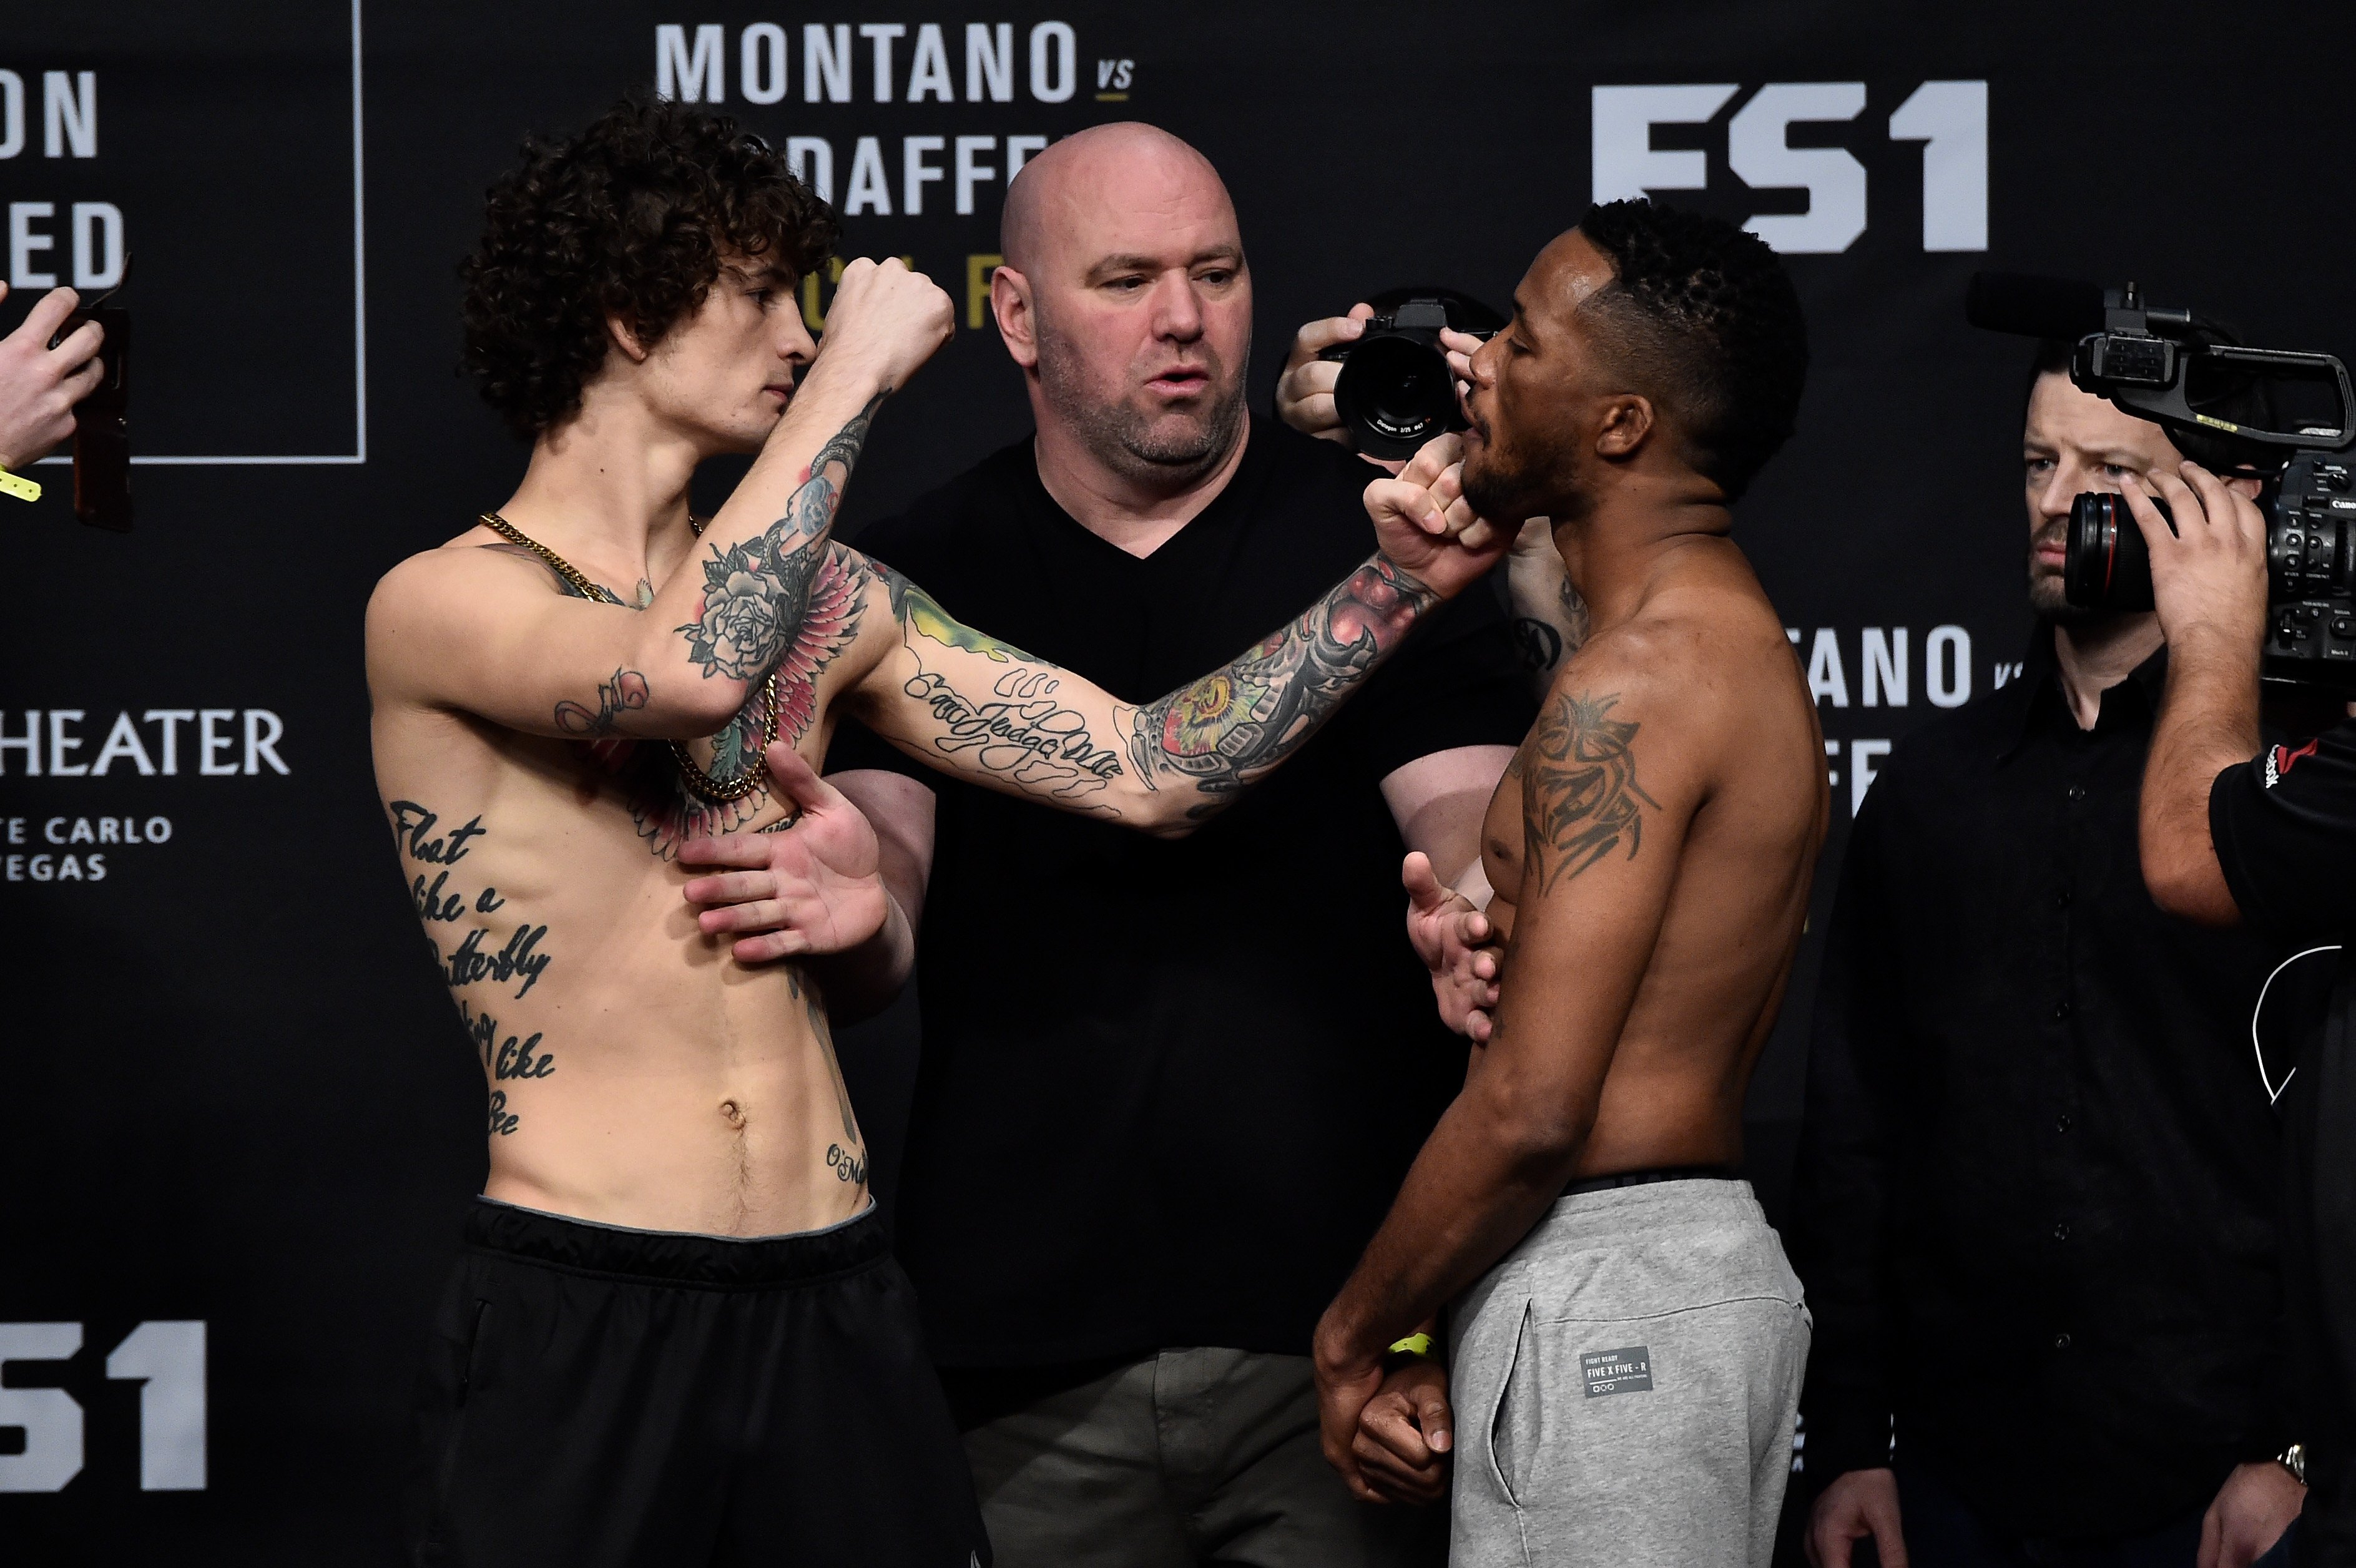 UFC Ultimate Fighter 26 Results (12/1): Modafferi v Montano For Women’s Flyweight Title, O’Malley v Ware, Honchak v Murphy, More